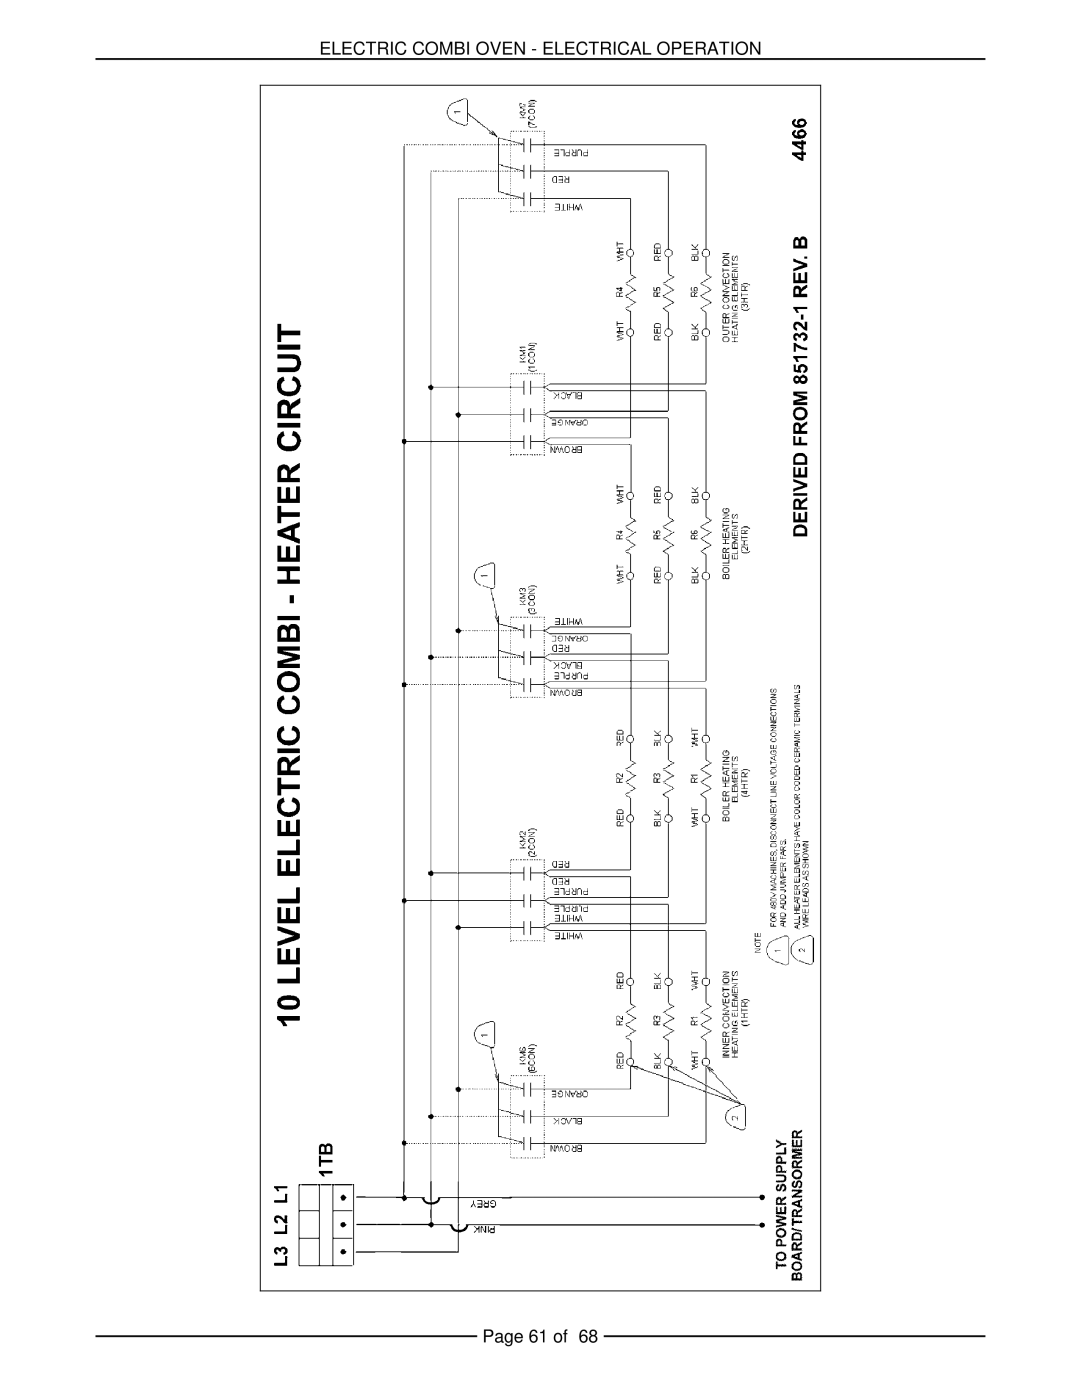 Vulcan-Hart VCE10H 126178, VCE20H 126172, VCE6H 126177, VCE20F 126173 Electric Combi Oven - Electrical Operation, Page 61 of 